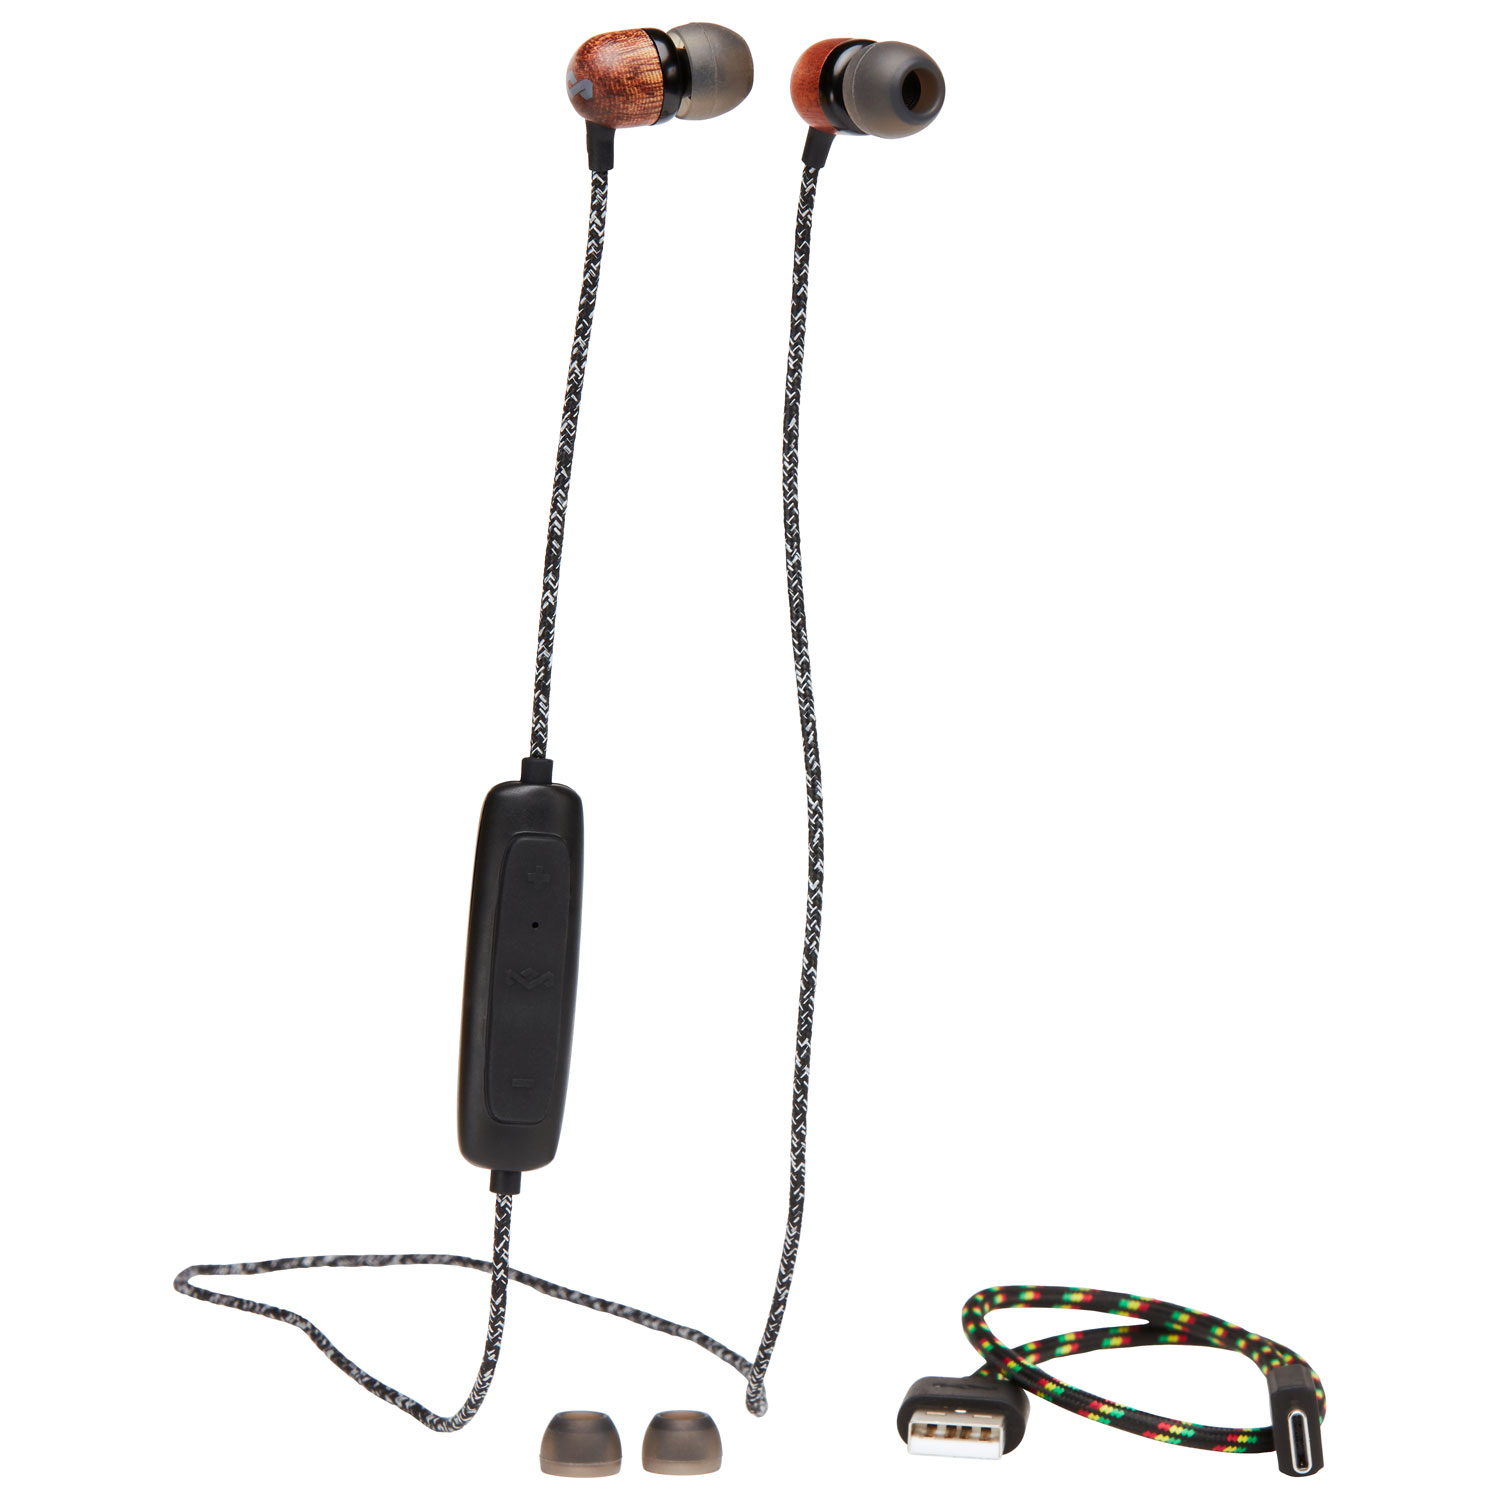 House of Marley Signature Black Smile Jamaica Wired Headphone